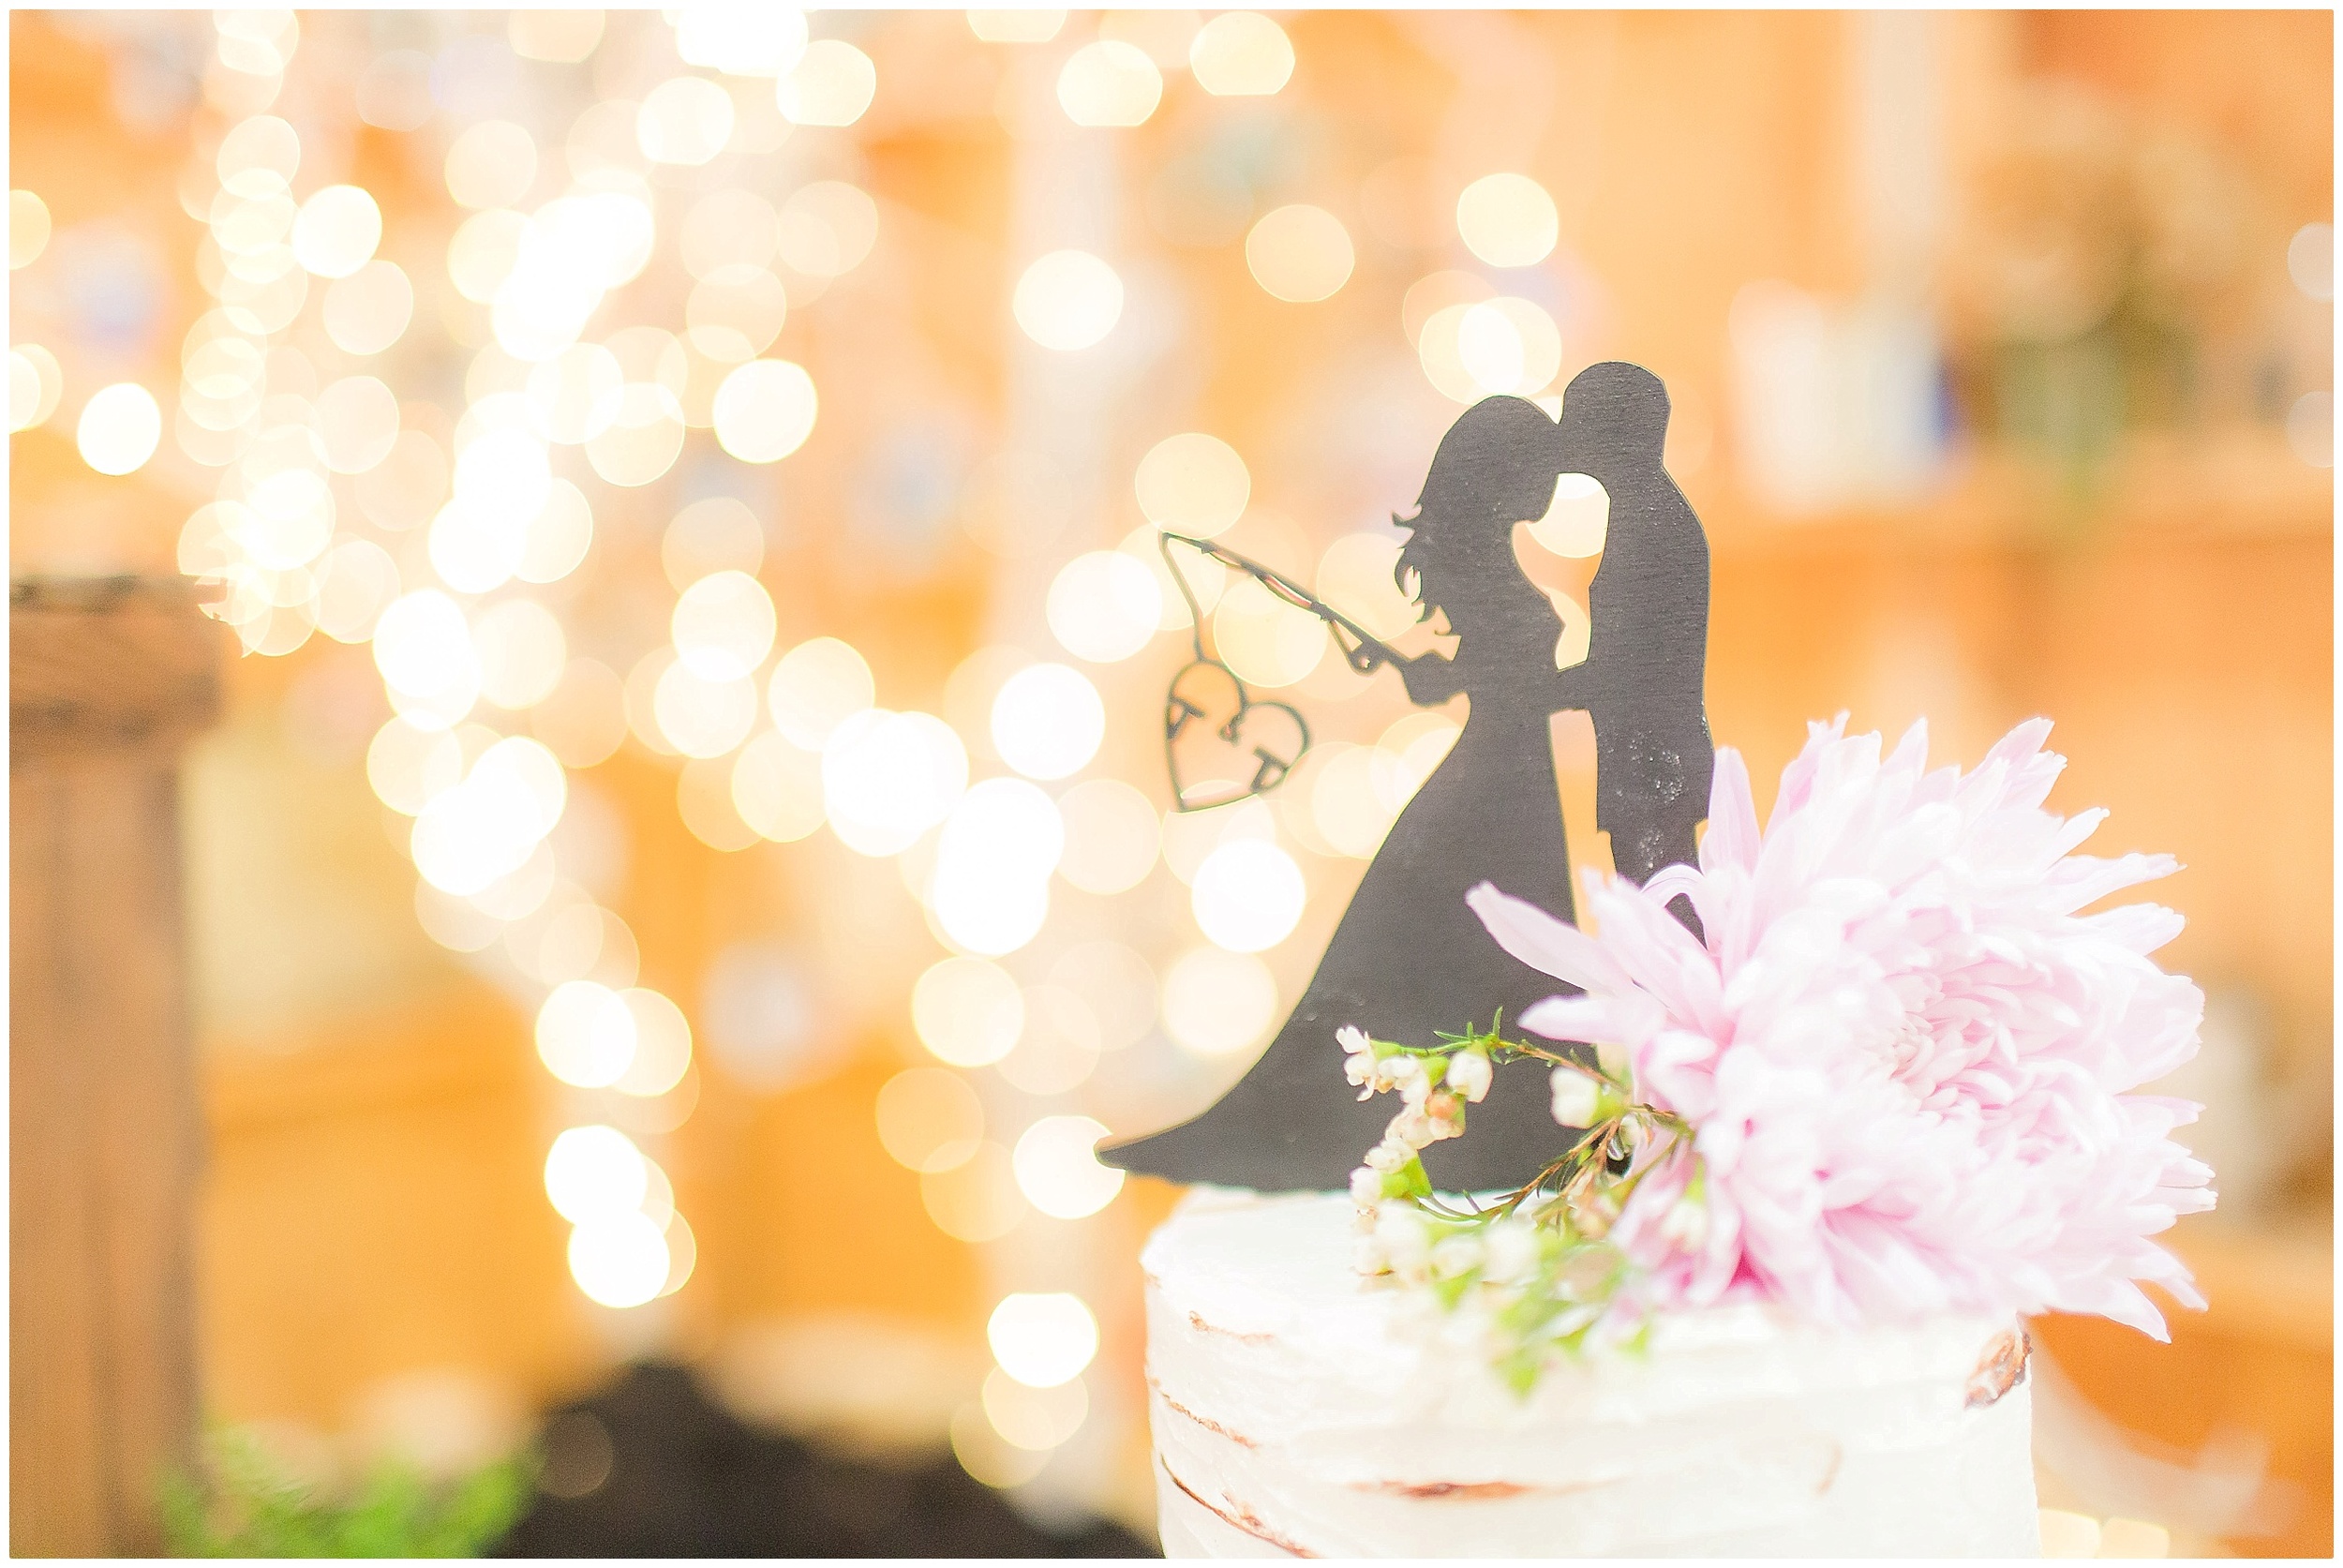 Silhouette Wedding Cake Topper with a Beautiful Rustic Wedding Cake.  